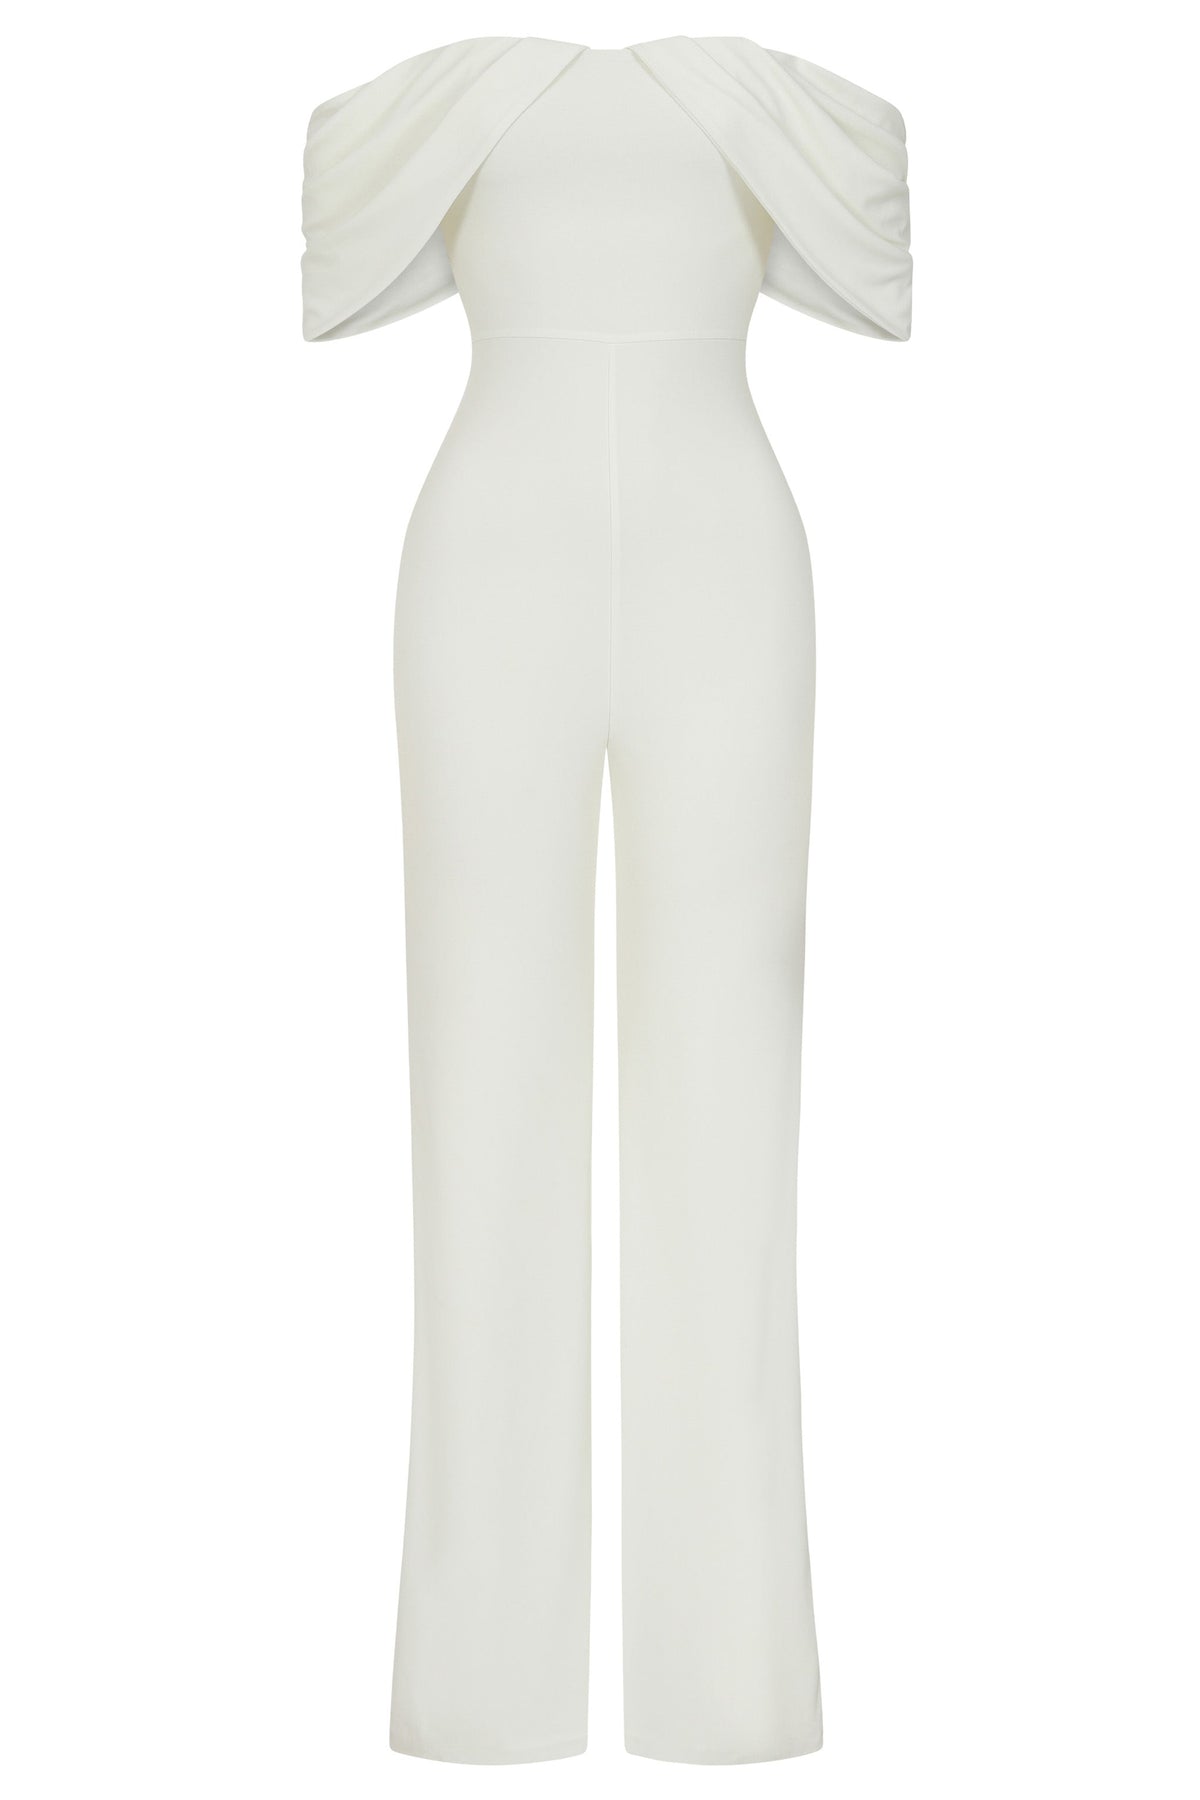 Women's White Jumpsuit One Side Ruffled/high Waist Wide Leg / Ruffle  Jumpsuit 70s Style/ruffled Trim One Shoulder. -  Canada